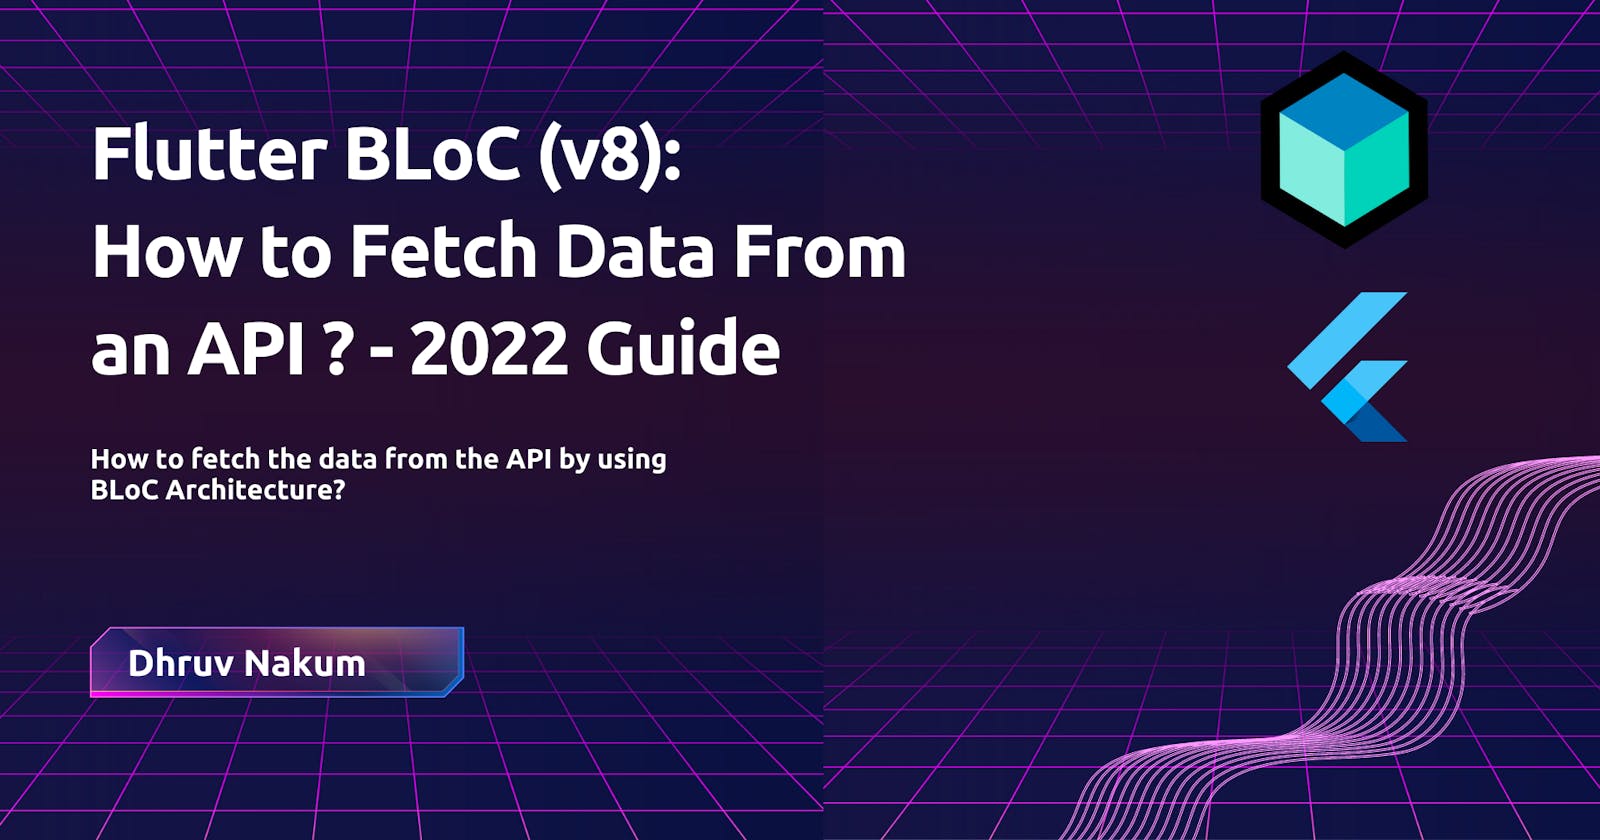 Flutter BLoC (v8): How to Fetch Data From an API? - 2022 Guide